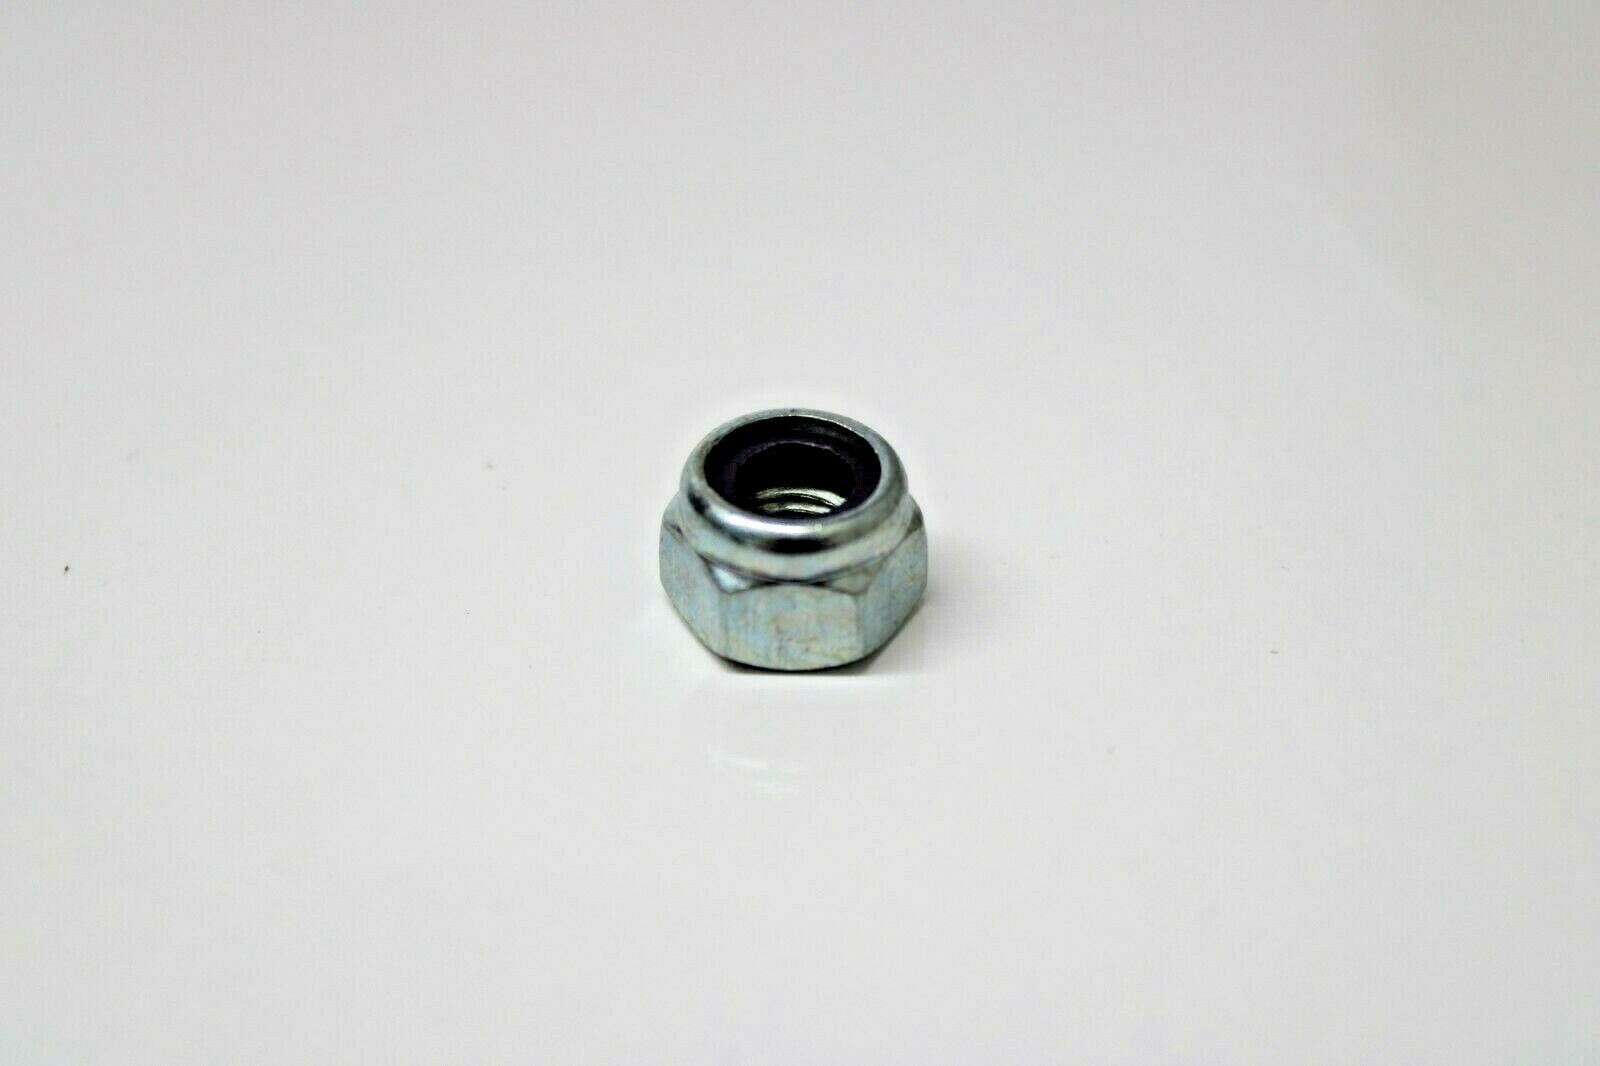 M10-1.25 or 10mm x 1.25 Serrated Flange Spin Wiz Lock Nuts Metric 14mm Hex 25 